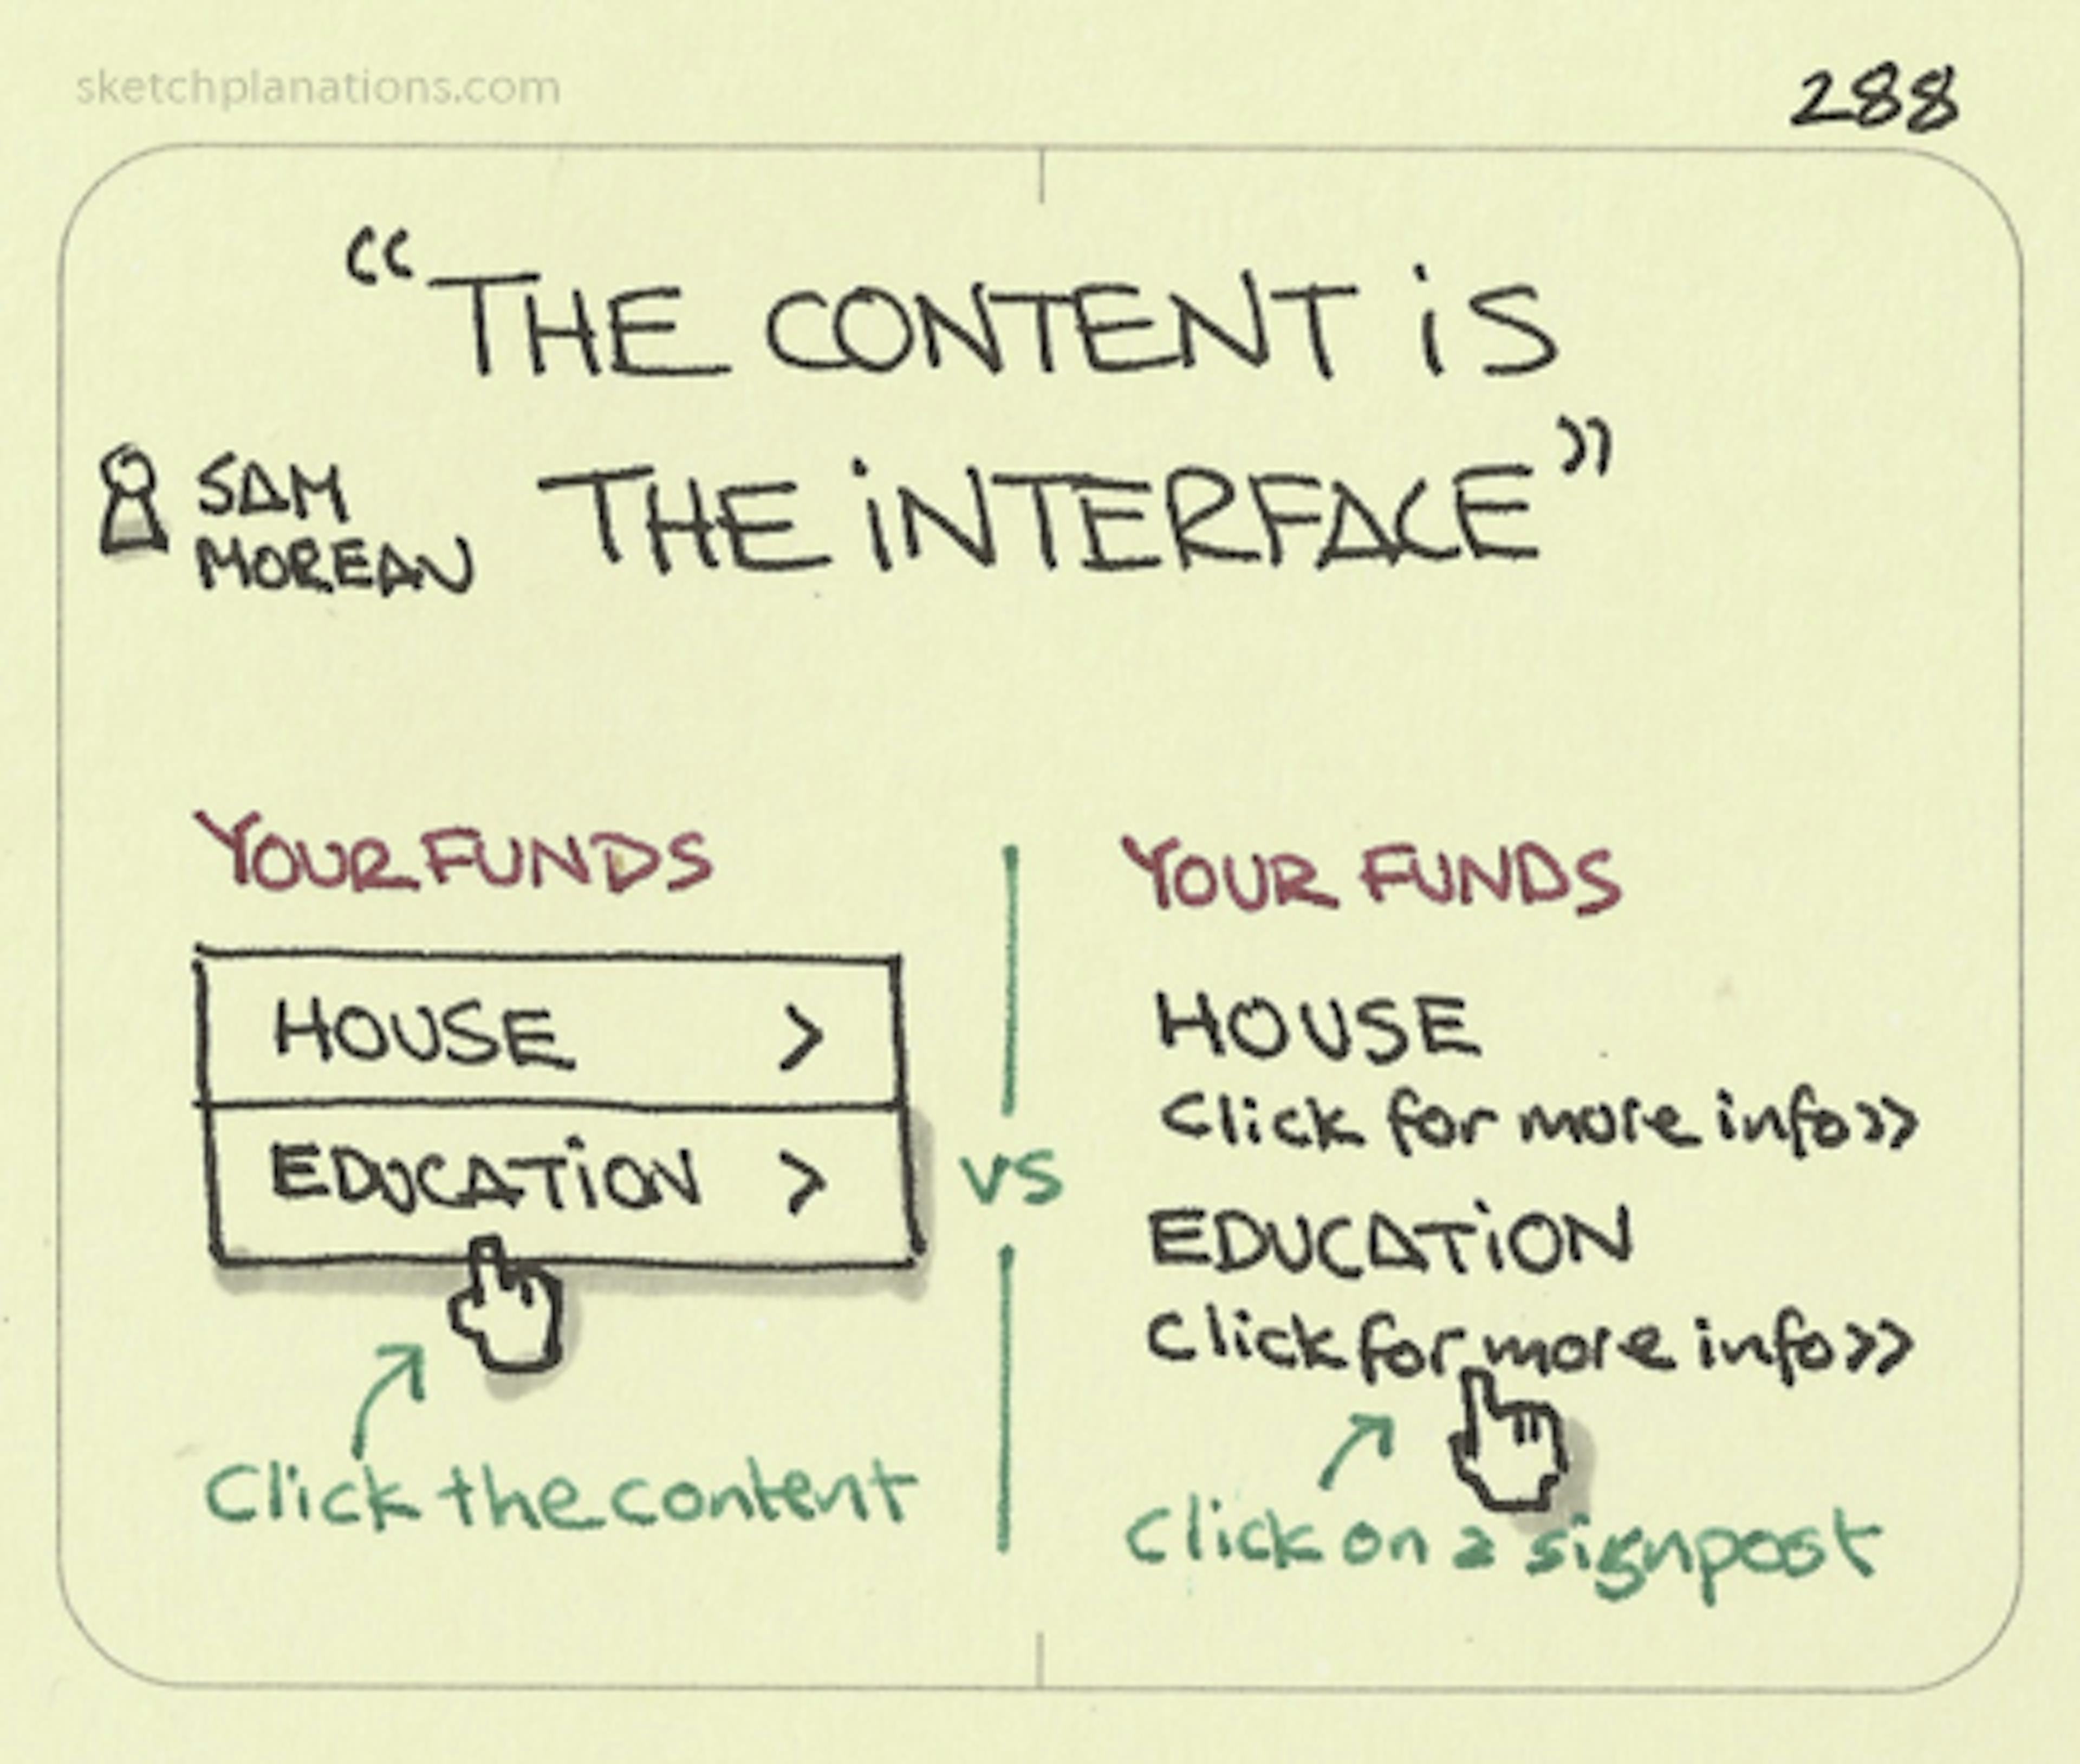 The content is the interface - Sketchplanations